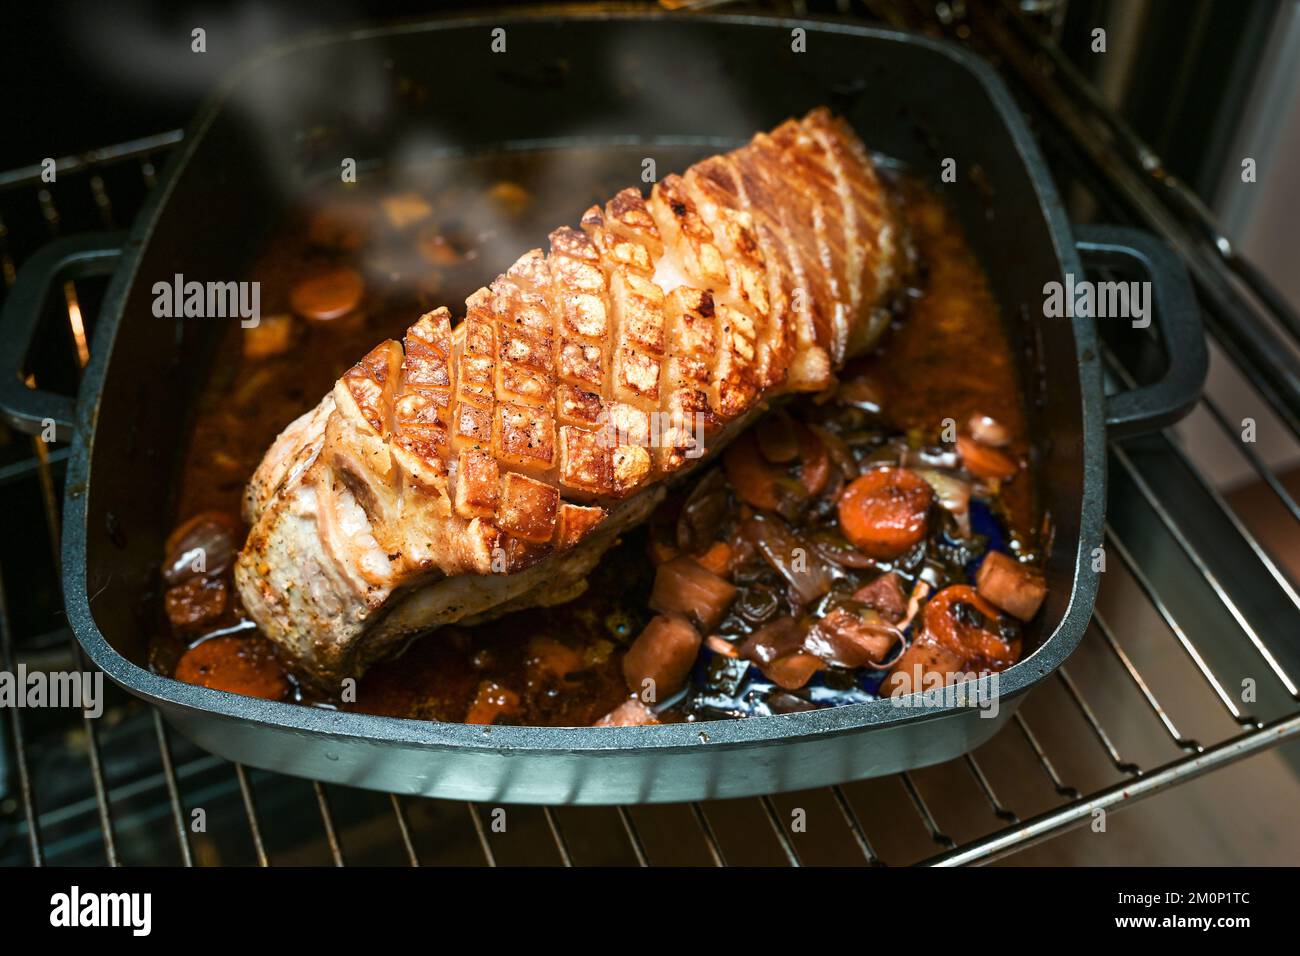 Festive crust roast from pork meat with crispy fat rind on a brown sauce base in a black cooking pan fresh from the oven, copy space, selected focus, Stock Photo